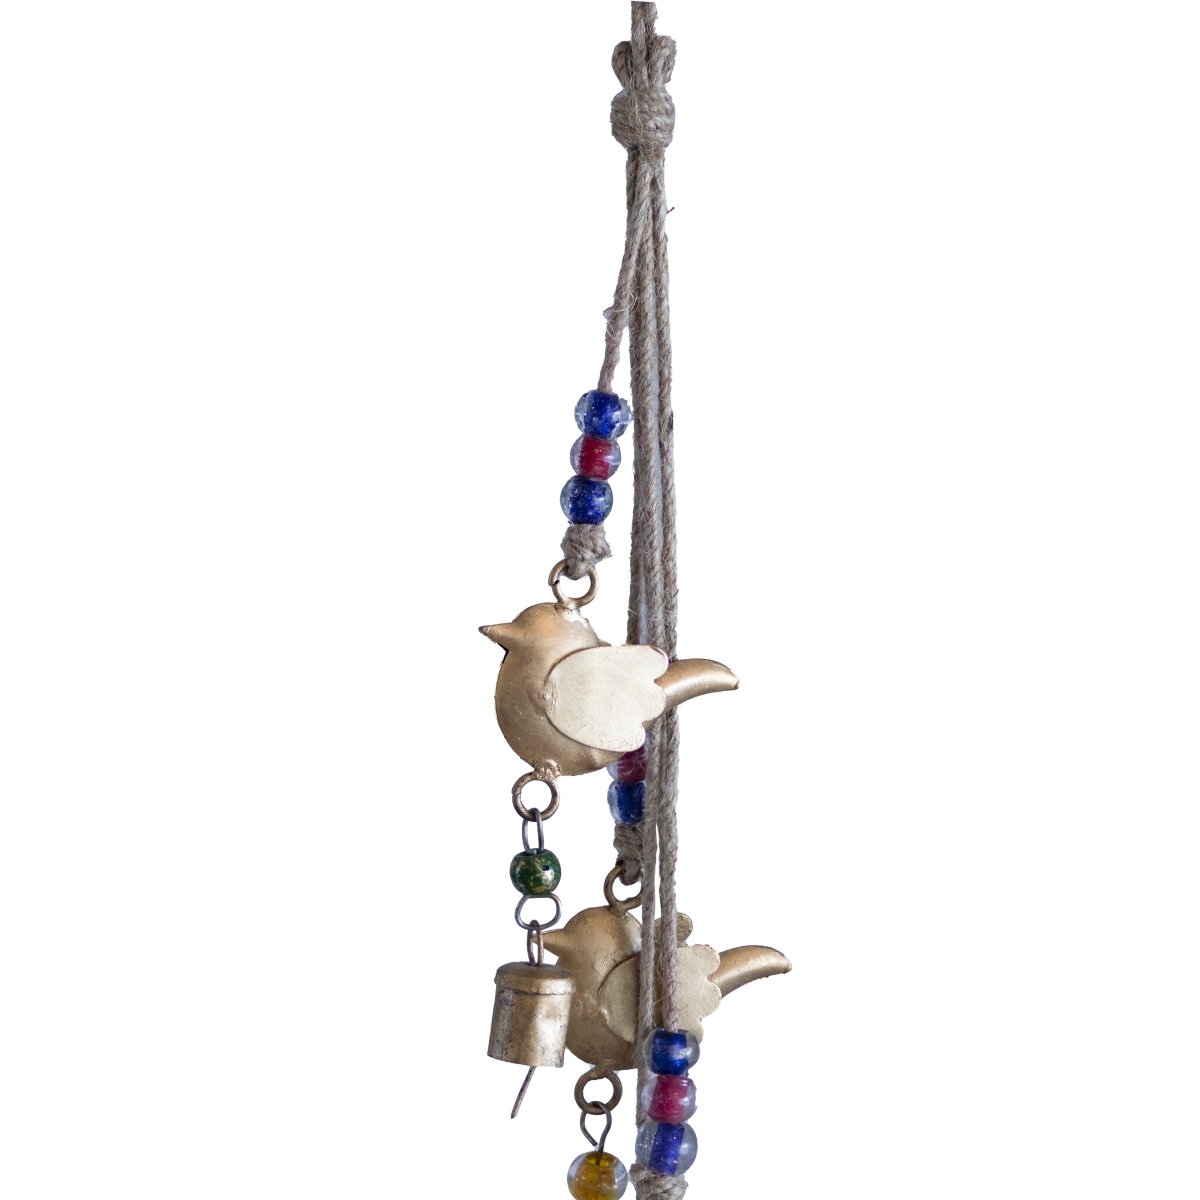 Kezevel Handmade Metal Hanging Bells - 5 Bird Antique Golden Wind Chime with Beads and Rope for Home Garden Decor, Balcony